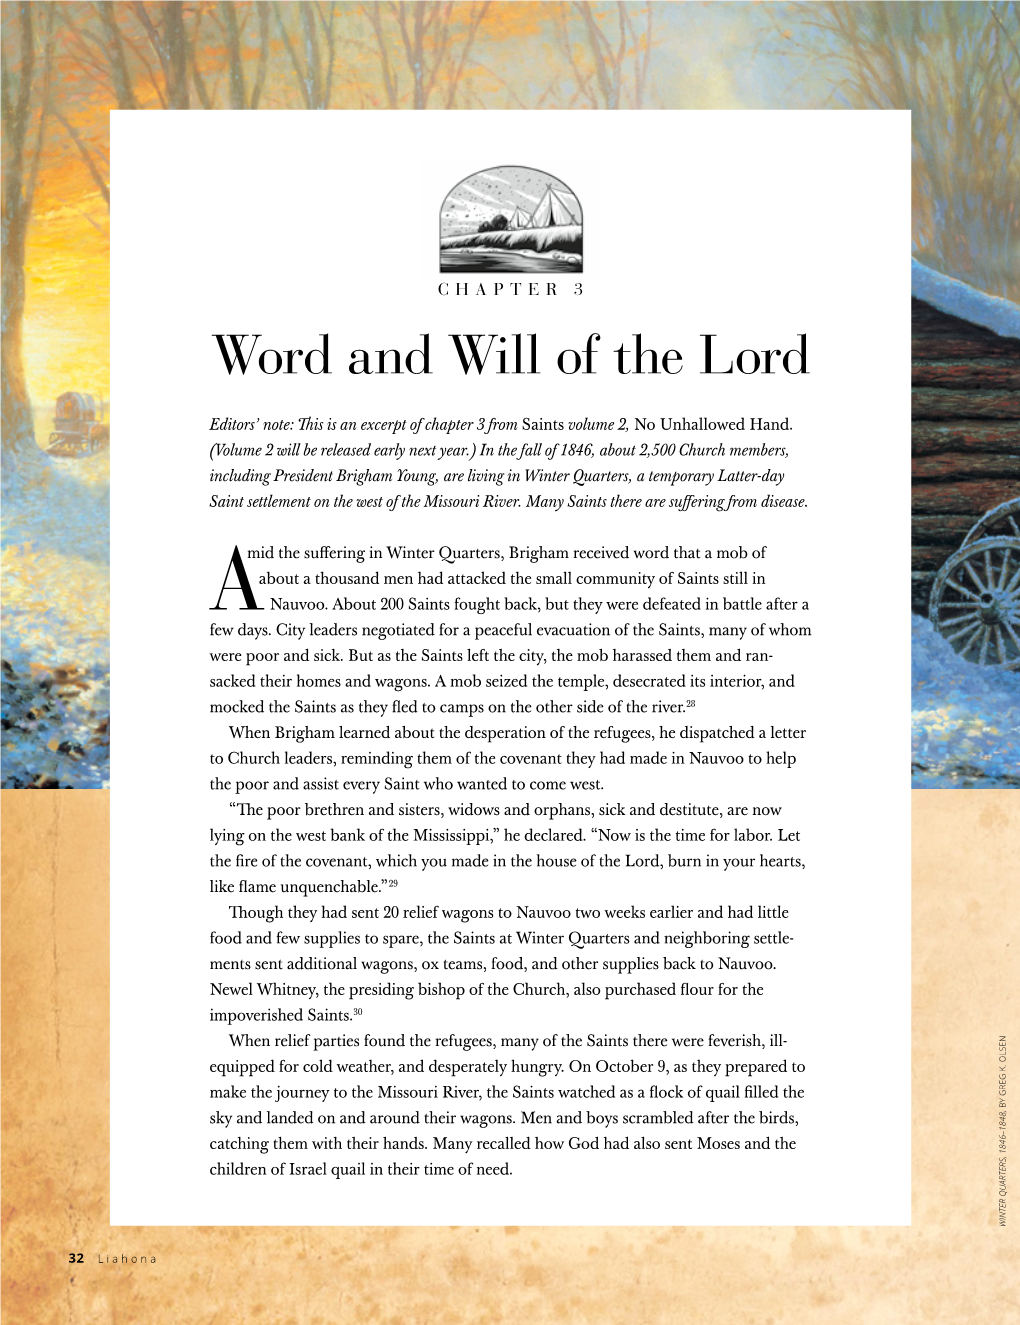 Word and Will of the Lord